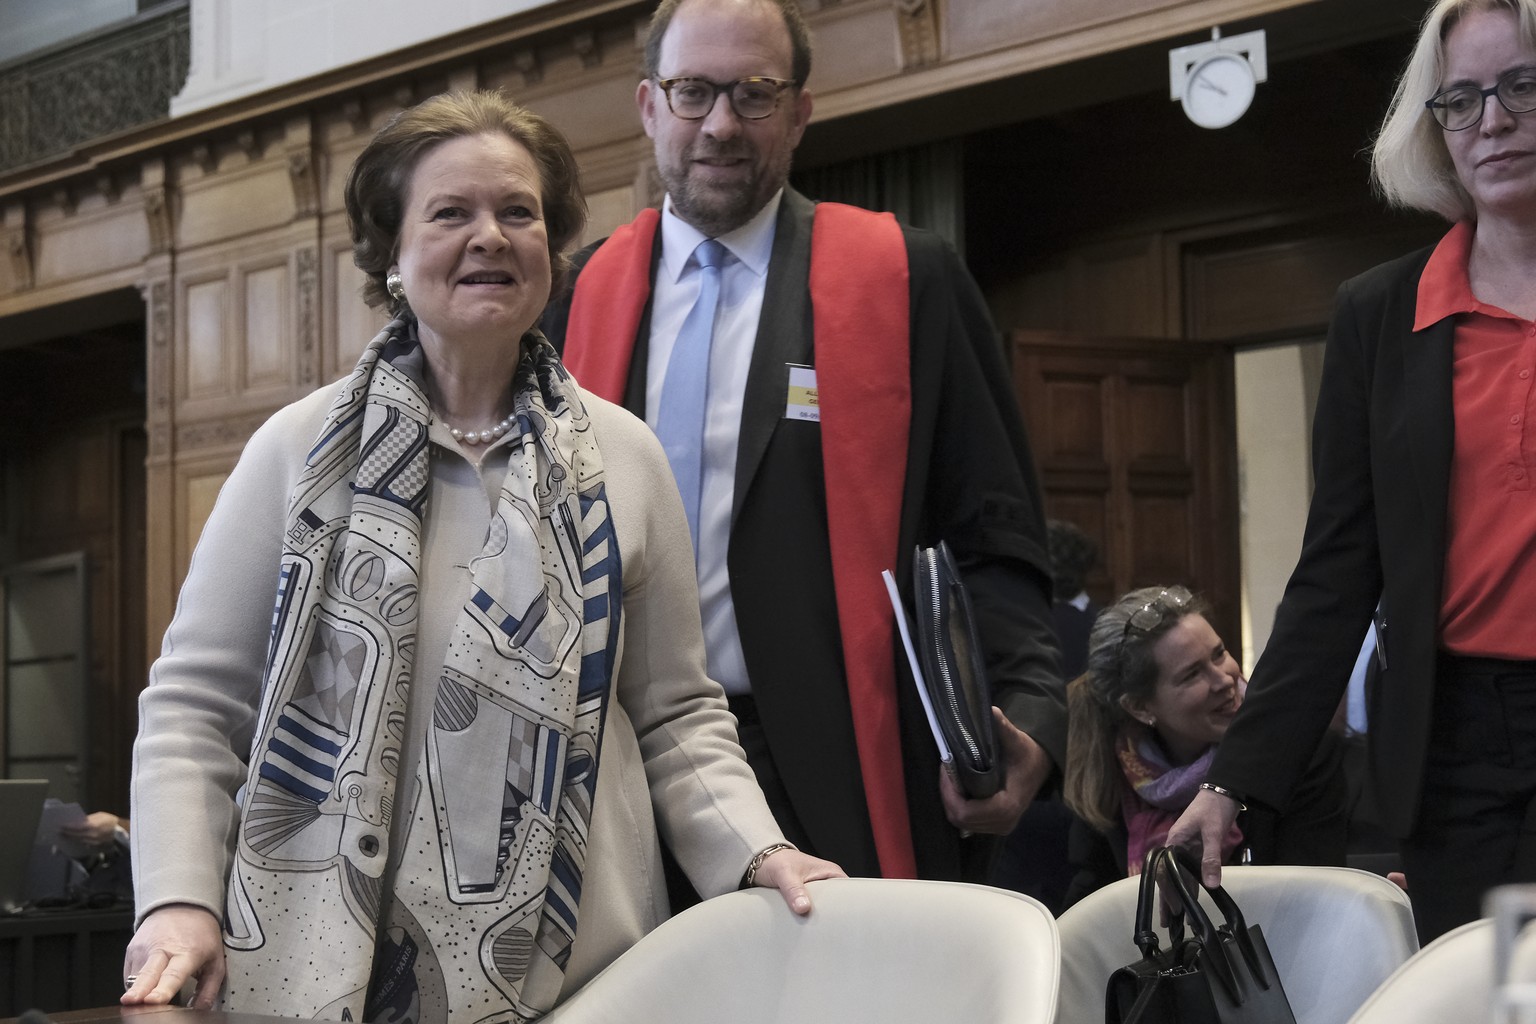 Tania von Uslar-Gleichen, Germany&#039;s legal adviser and Director-General for Legal Affairs of the German Foreign Ministry, left, and the member of Germany&#039;s legal team, Christian J. Tams, cent ...